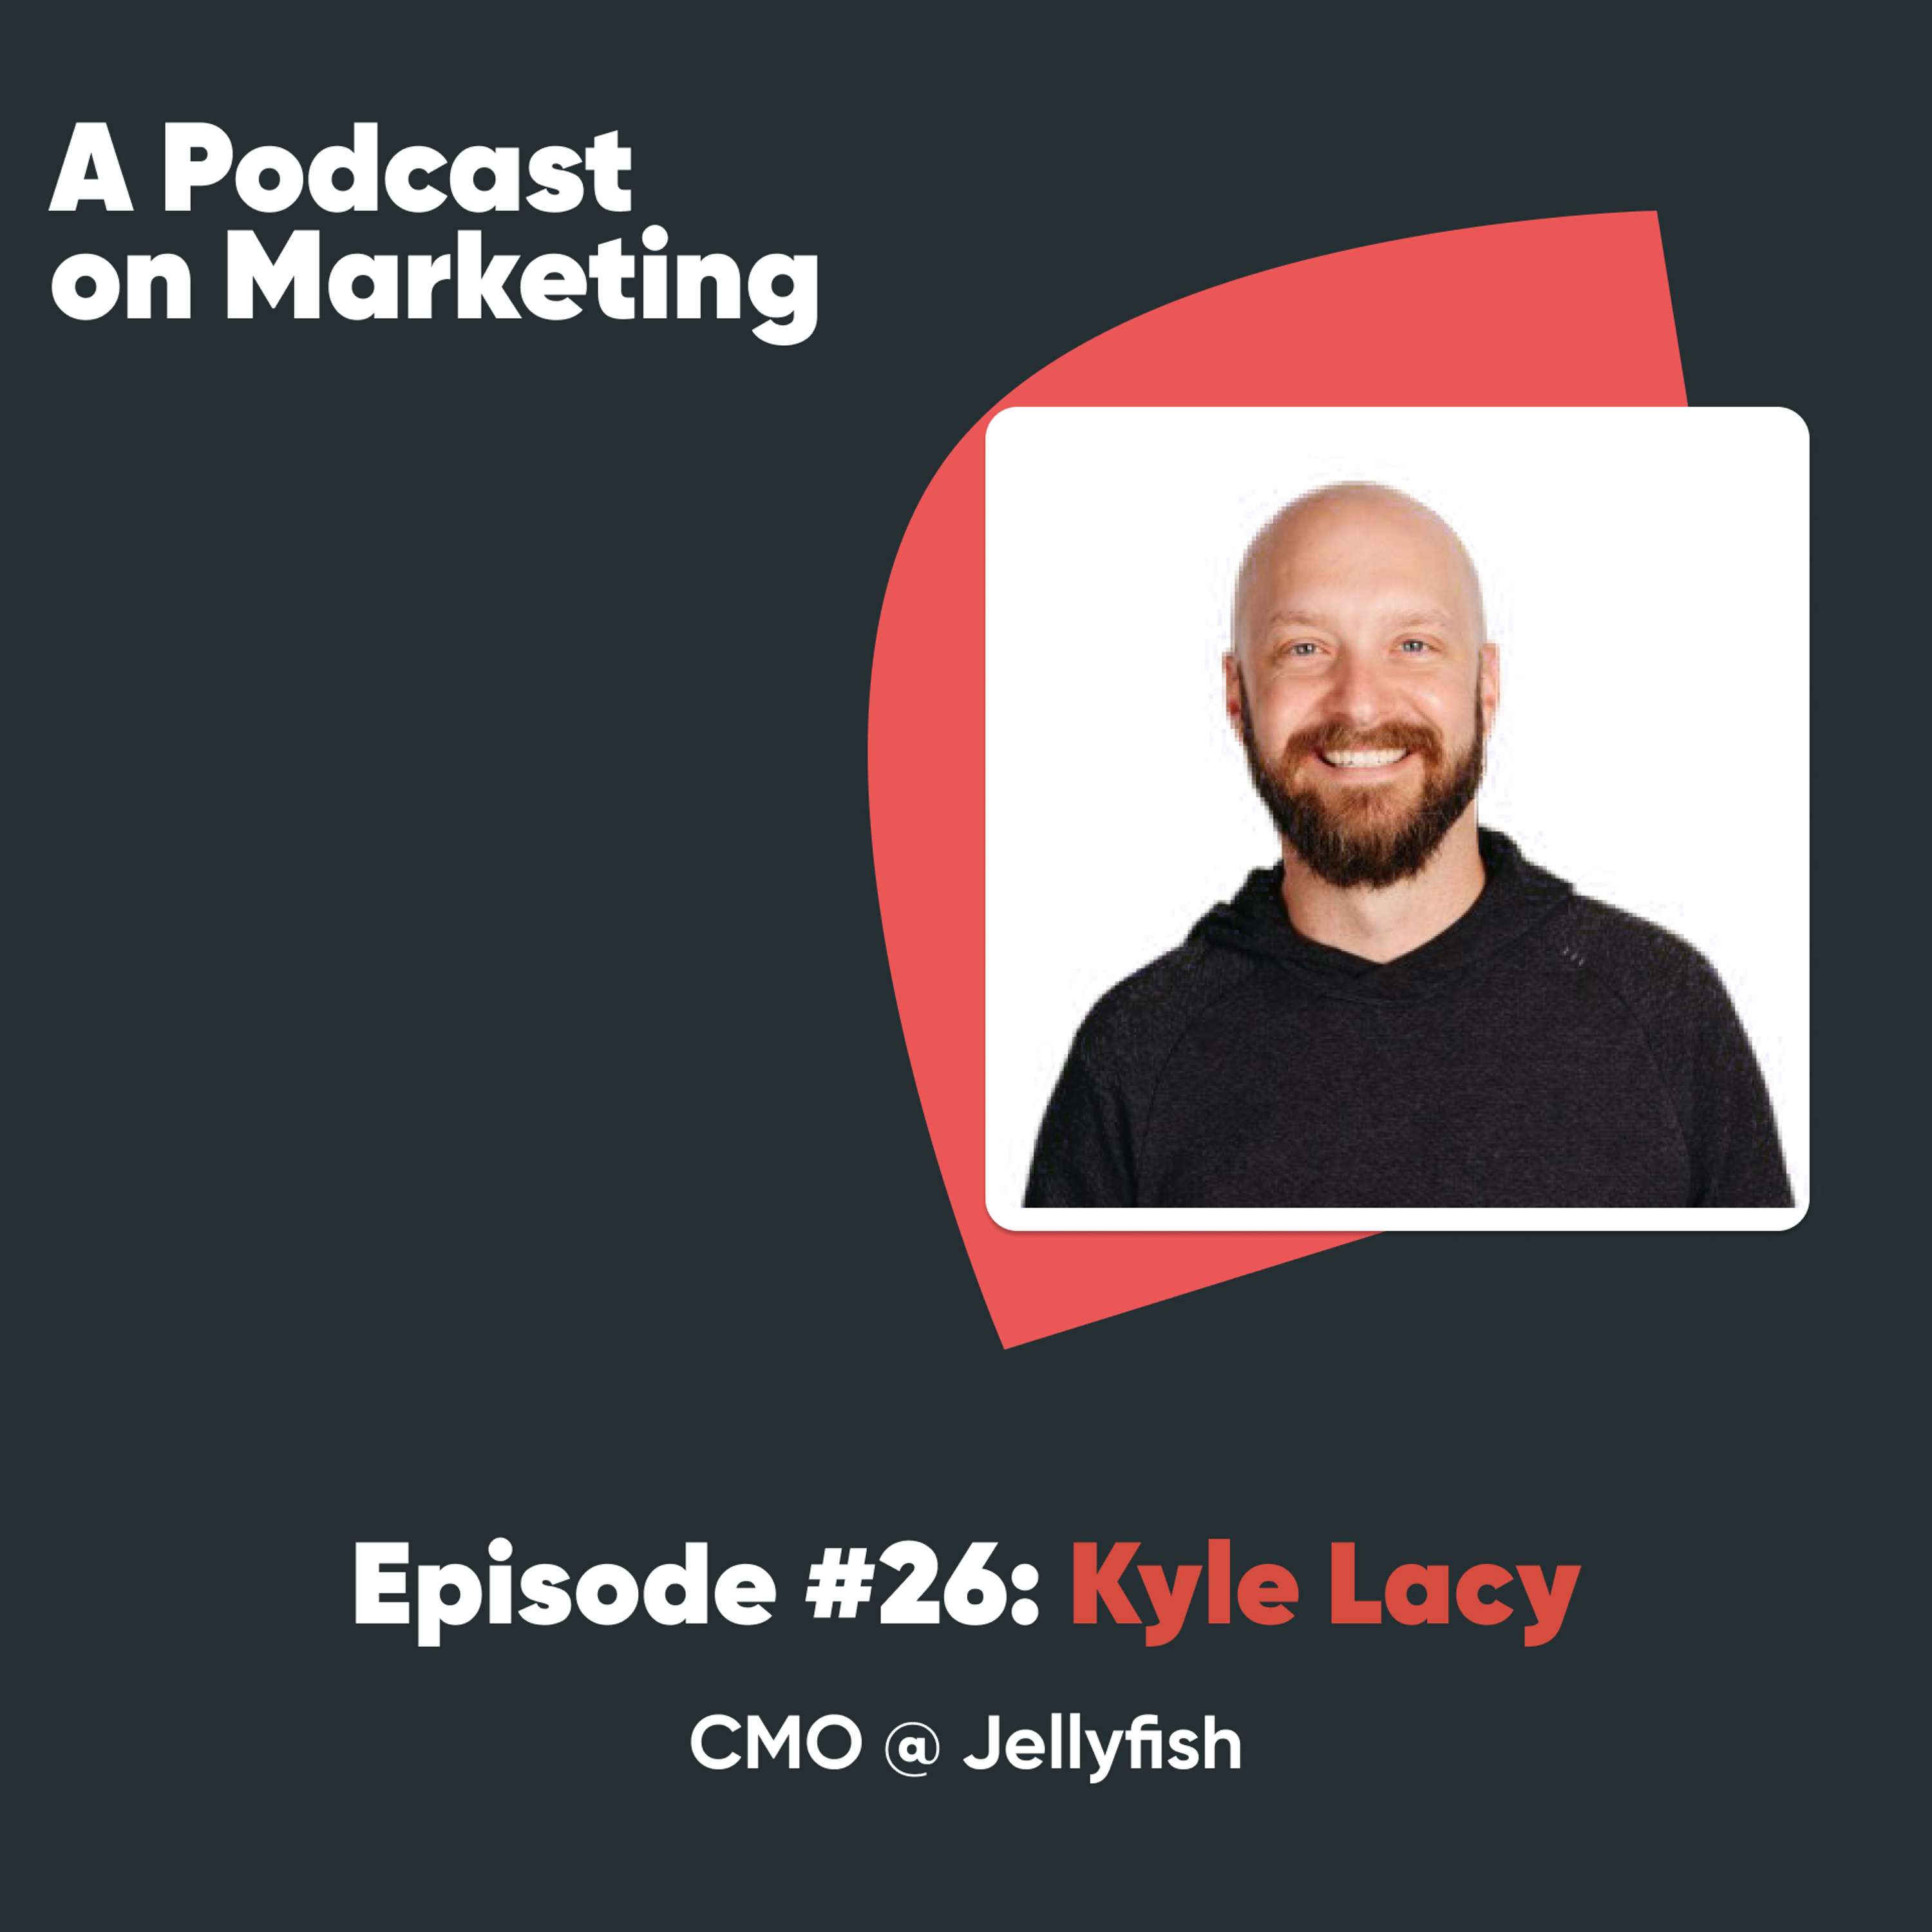 #26 Kyle Lacy: CMO @ Jellyfish